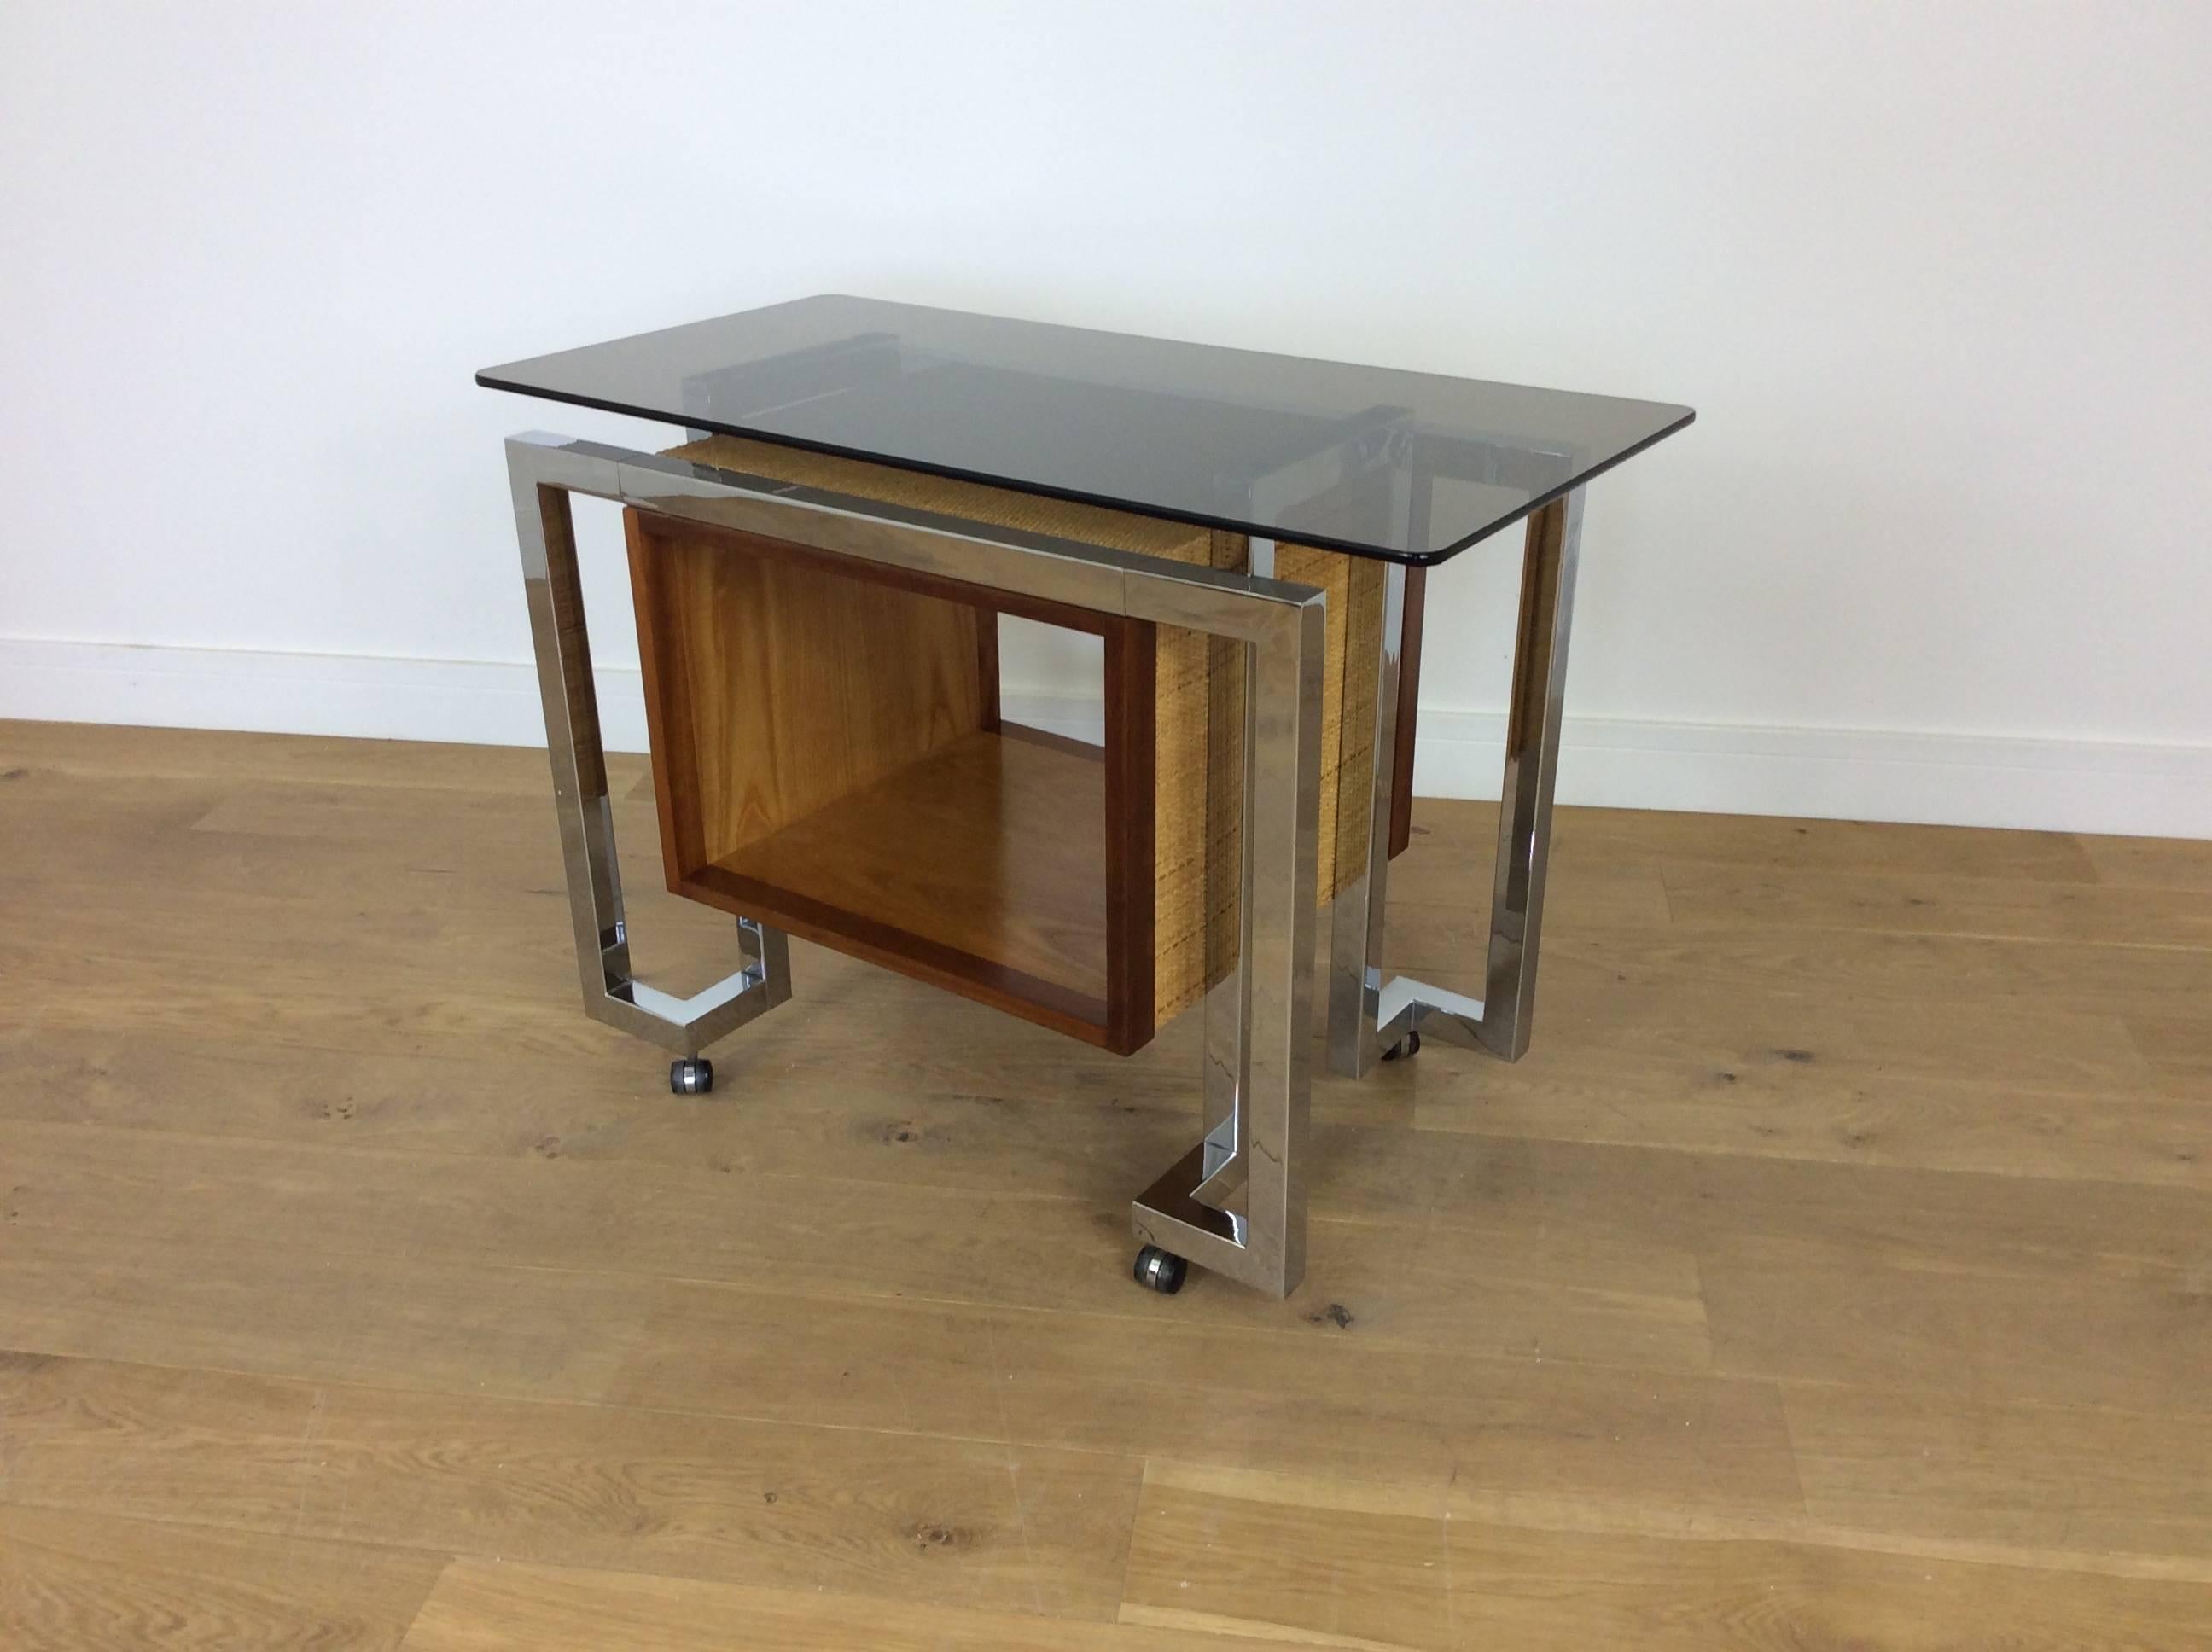 20th Century Midcentury Bar Cart Designed by Tim Bates for Pieff